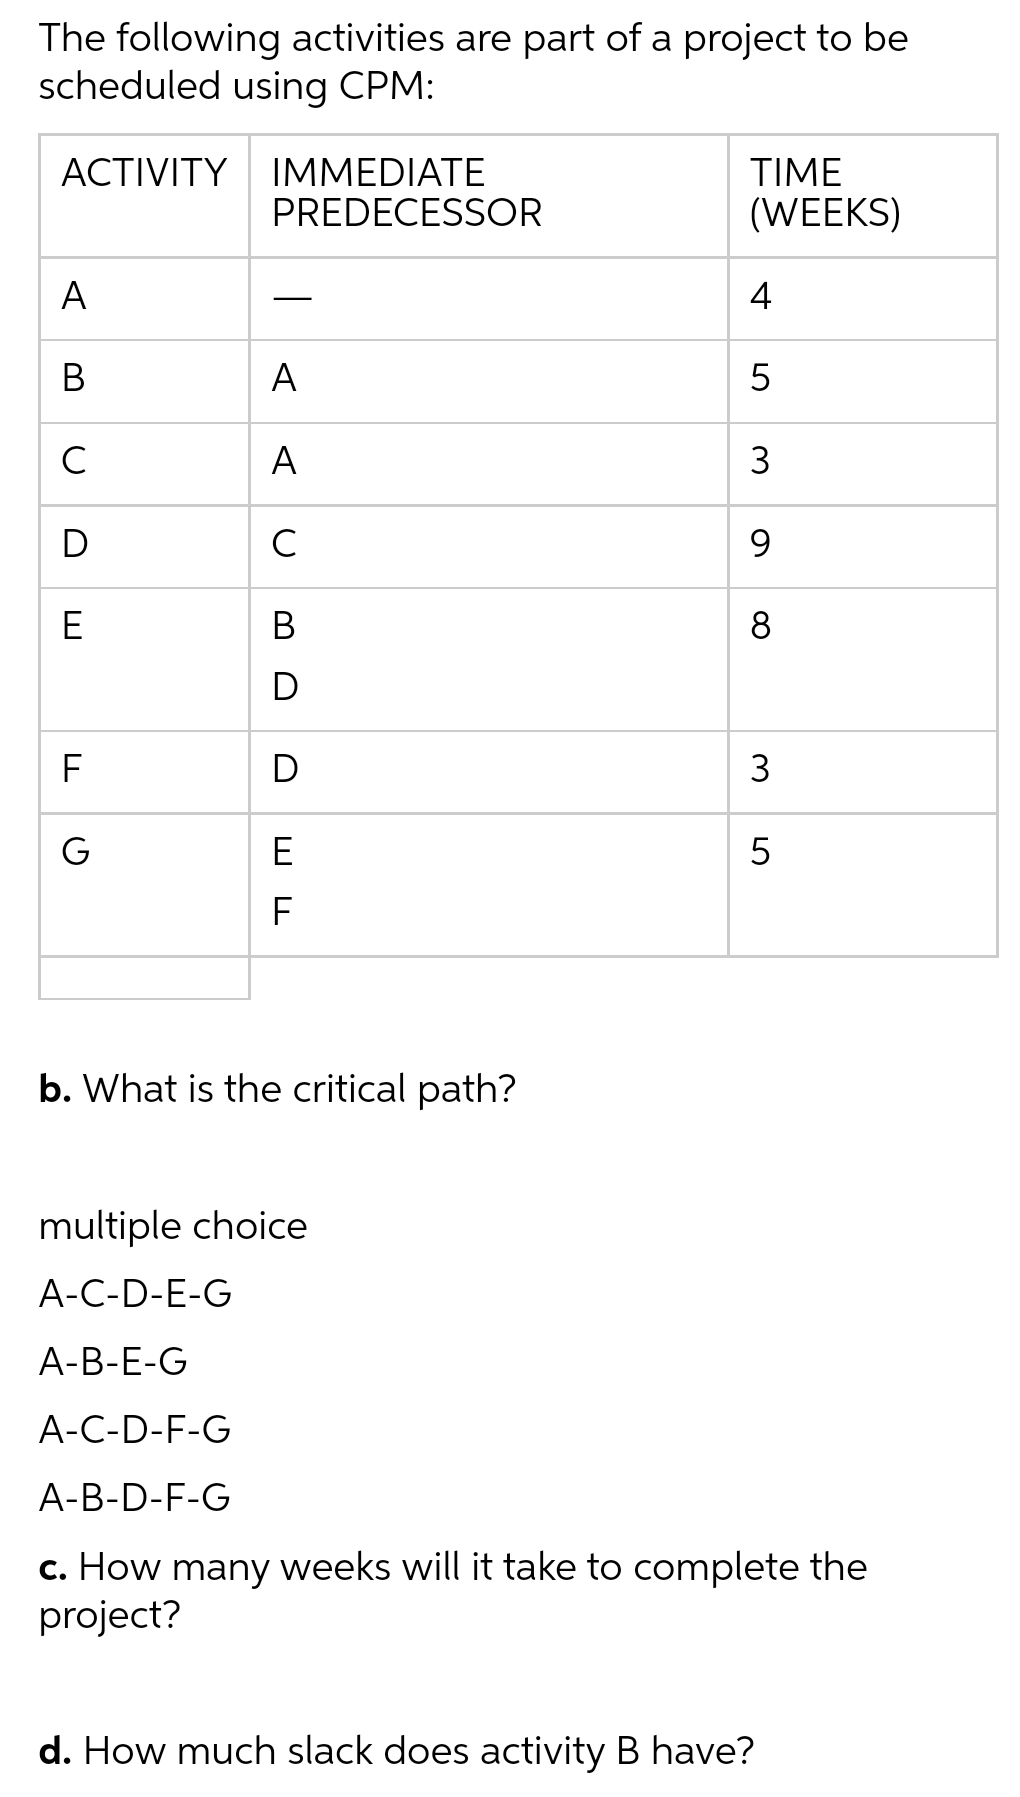 The following activities are part of a project to be
scheduled using CPM:
ACTIVITY IMMEDIATE
A
B
C
D
E
TI
G
PREDECESSOR
A
A
с
B
D
D
EE
b. What is the critical path?
TIME
(WEEKS)
4
5
3
9
8
3
5
multiple choice
A-C-D-E-G
A-B-E-G
A-C-D-F-G
A-B-D-F-G
c. How many weeks will it take to complete the
project?
d. How much slack does activity B have?